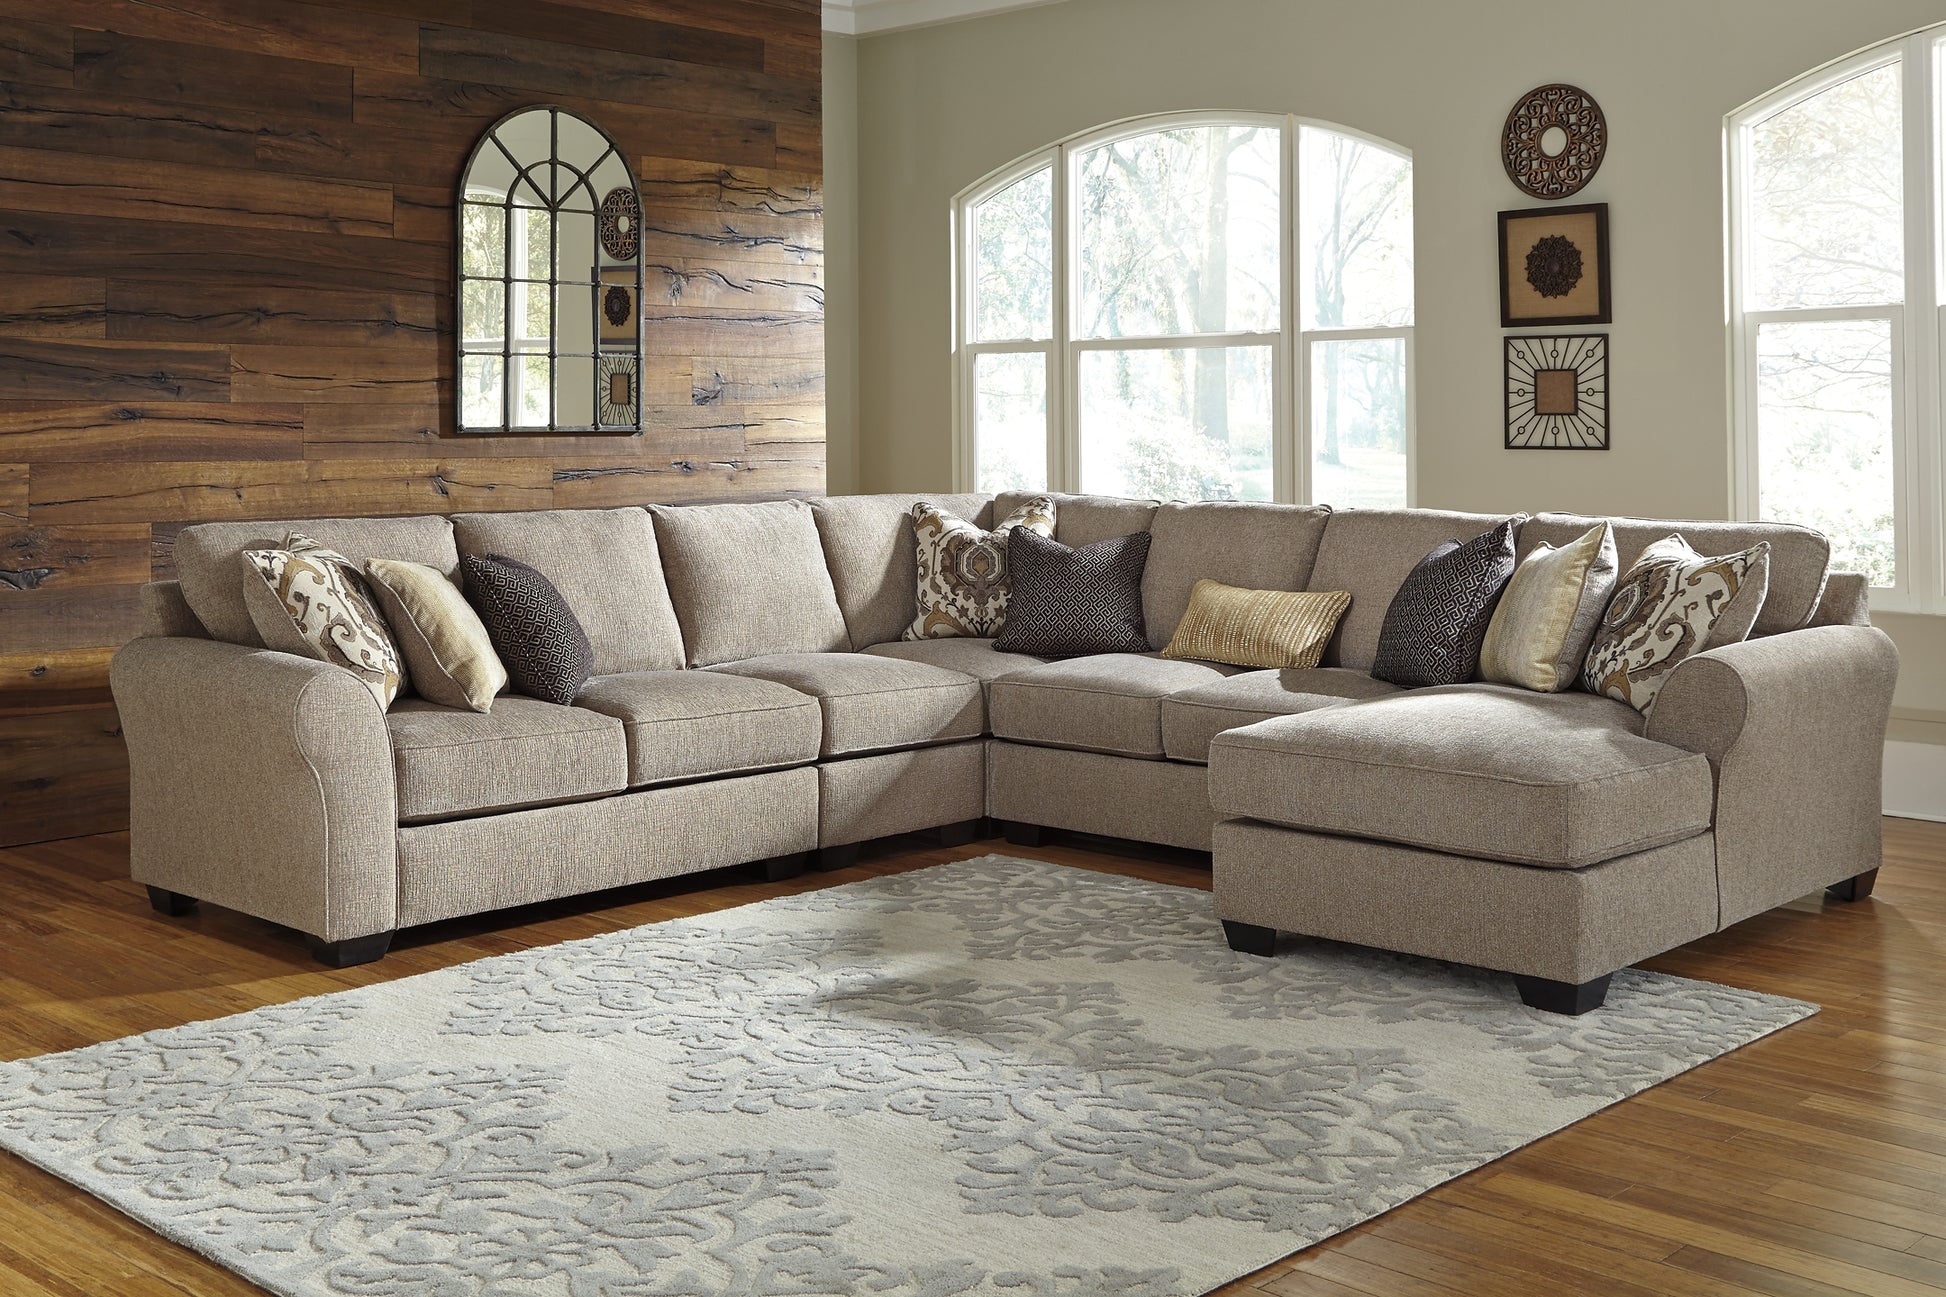 Pantomine 5-Piece Sectional with Ottoman Wilson Furniture (OH)  in Bridgeport, Ohio. Serving Bridgeport, Yorkville, Bellaire, & Avondale